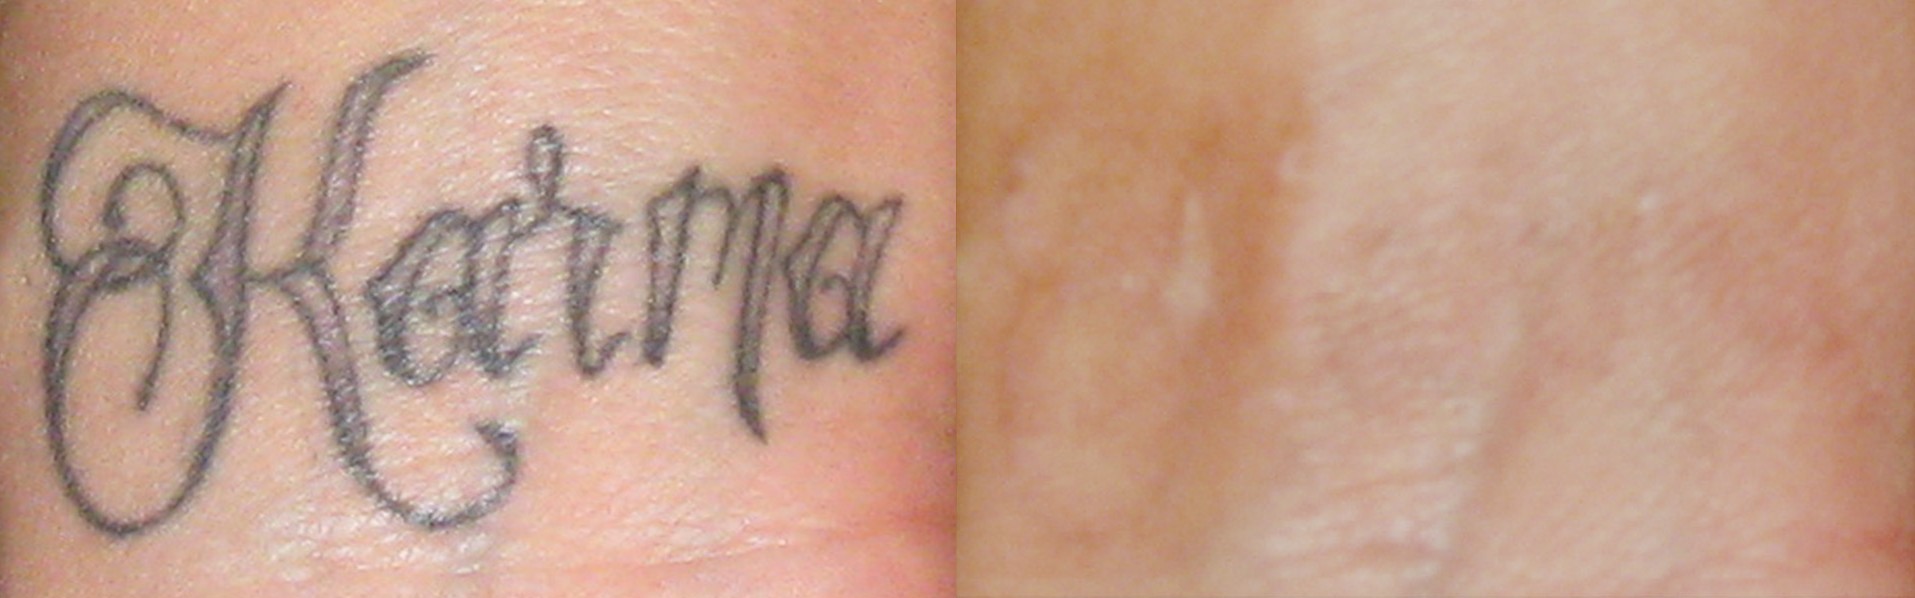 Downers Grove Laser Tattoo Removal